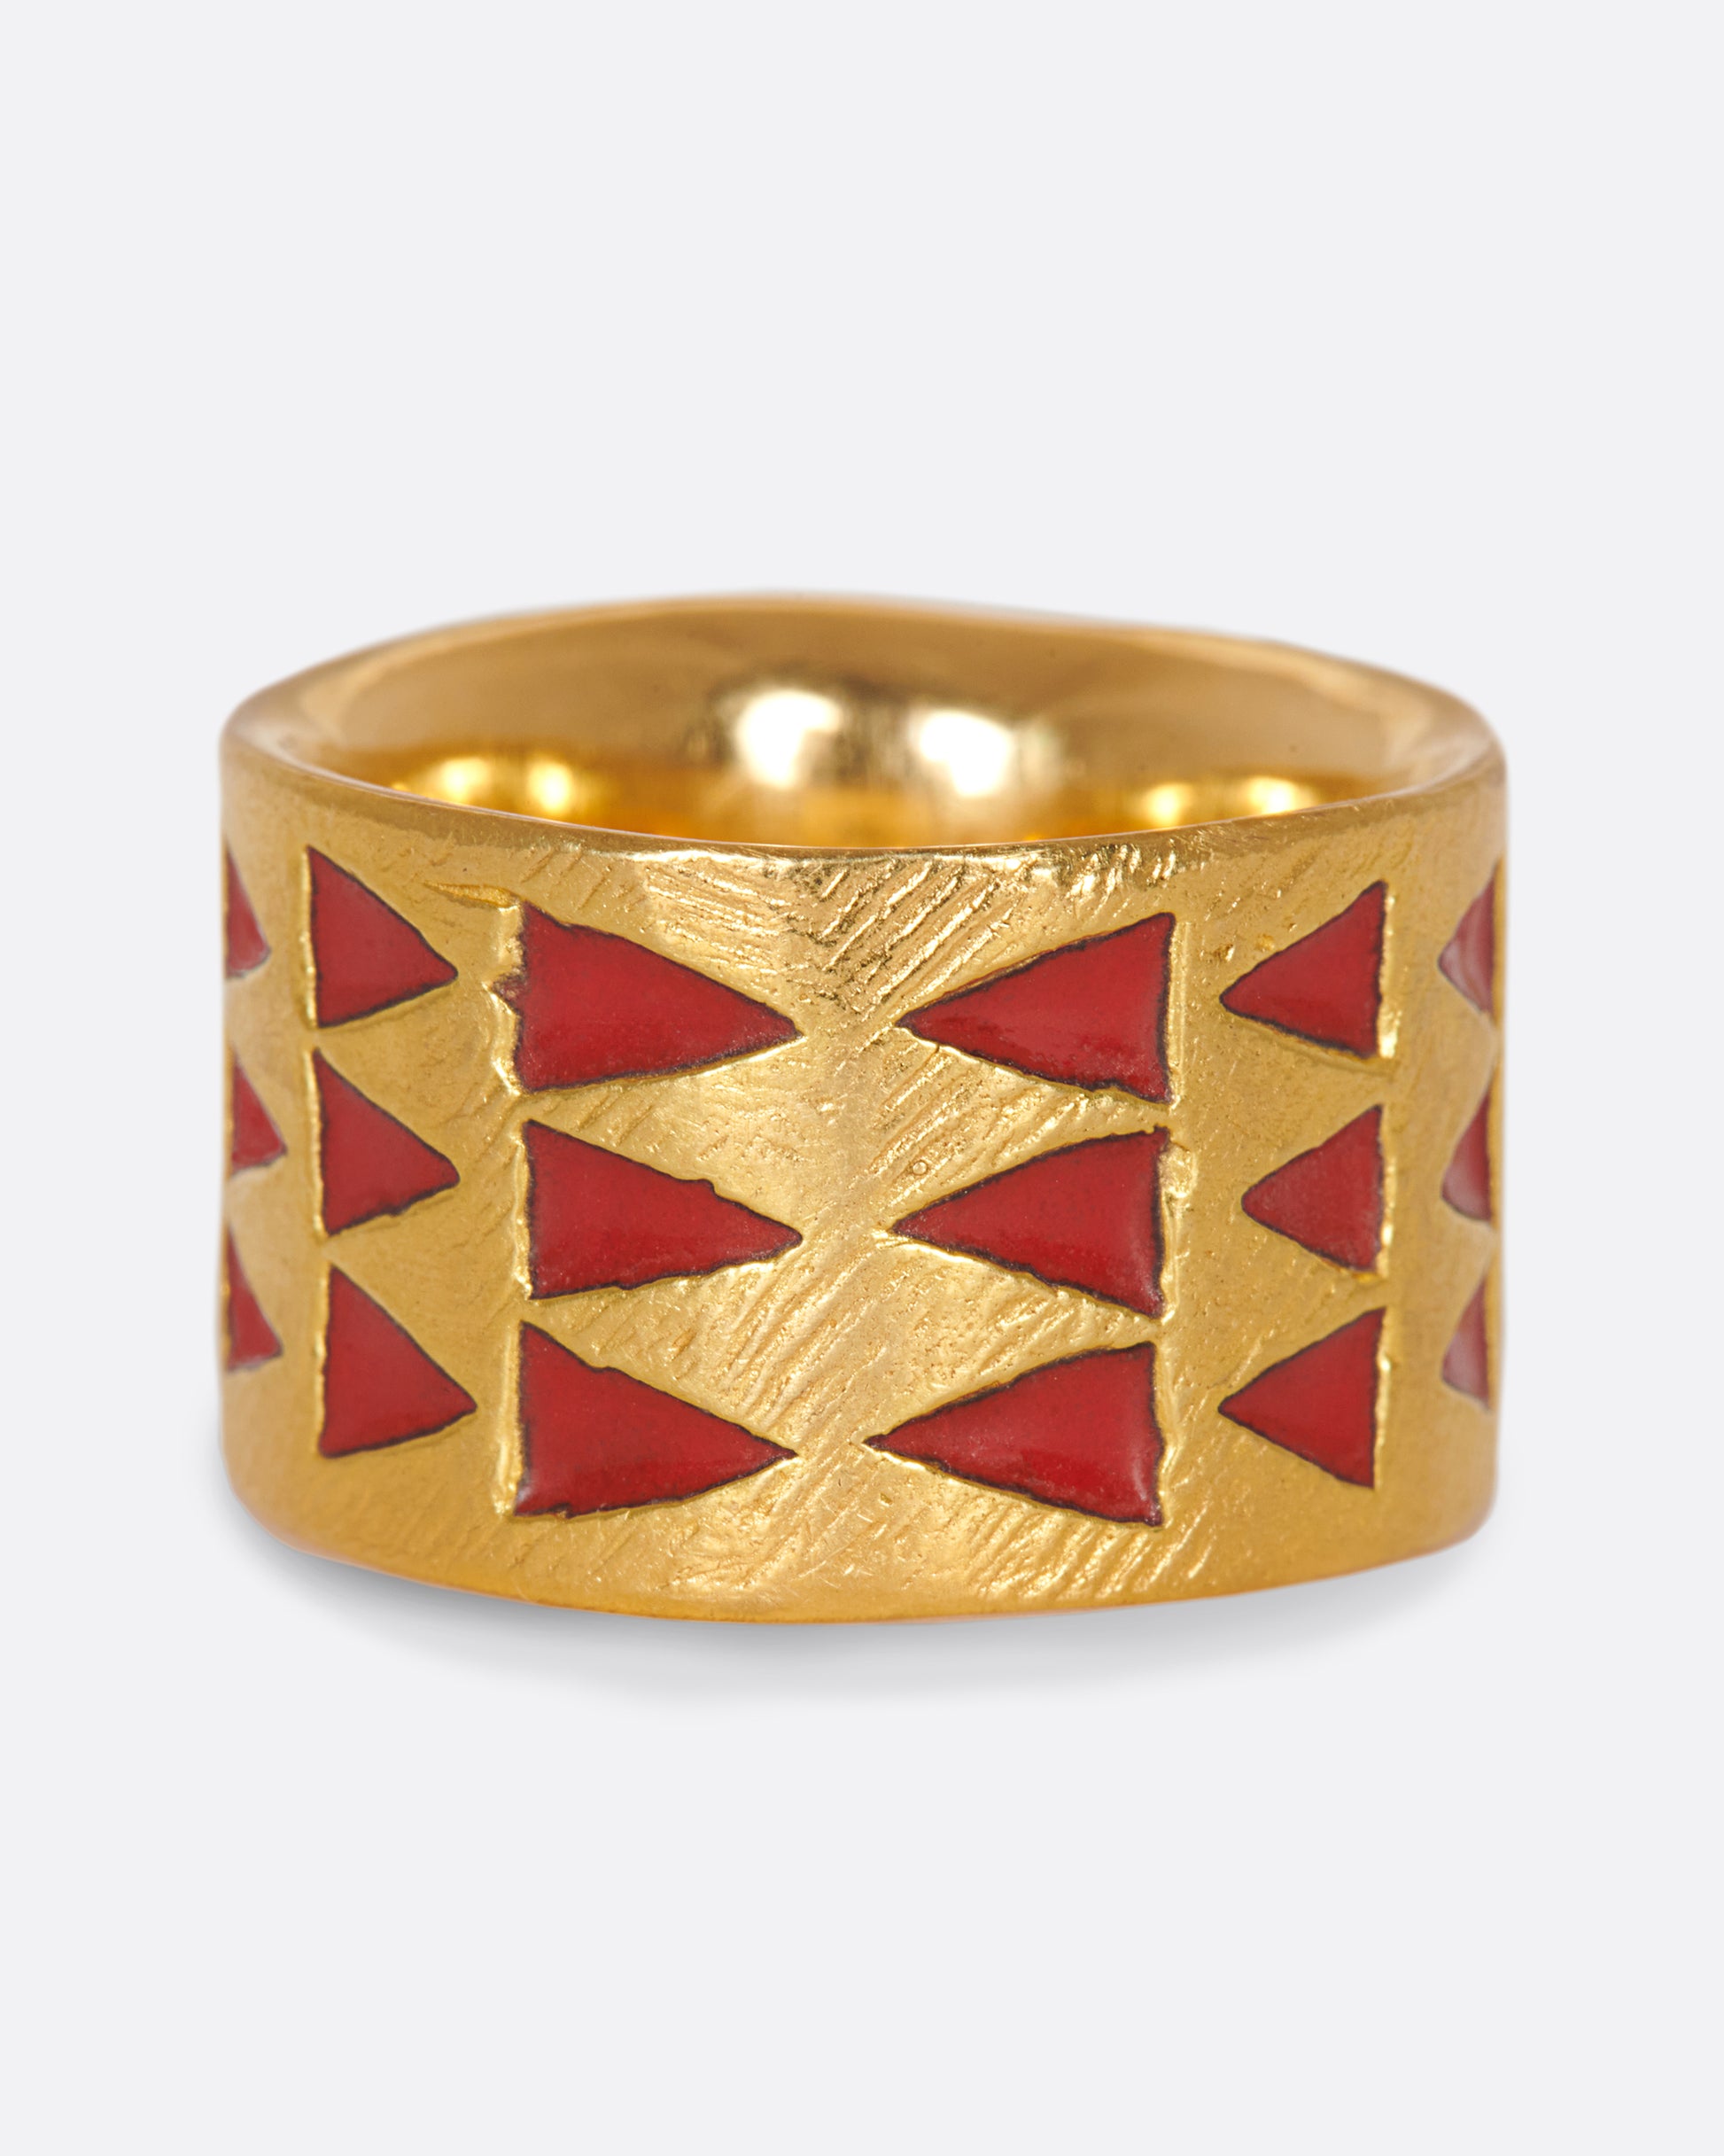 A handcrafted yellow gold band with red enamel triangles that meet at one center point.